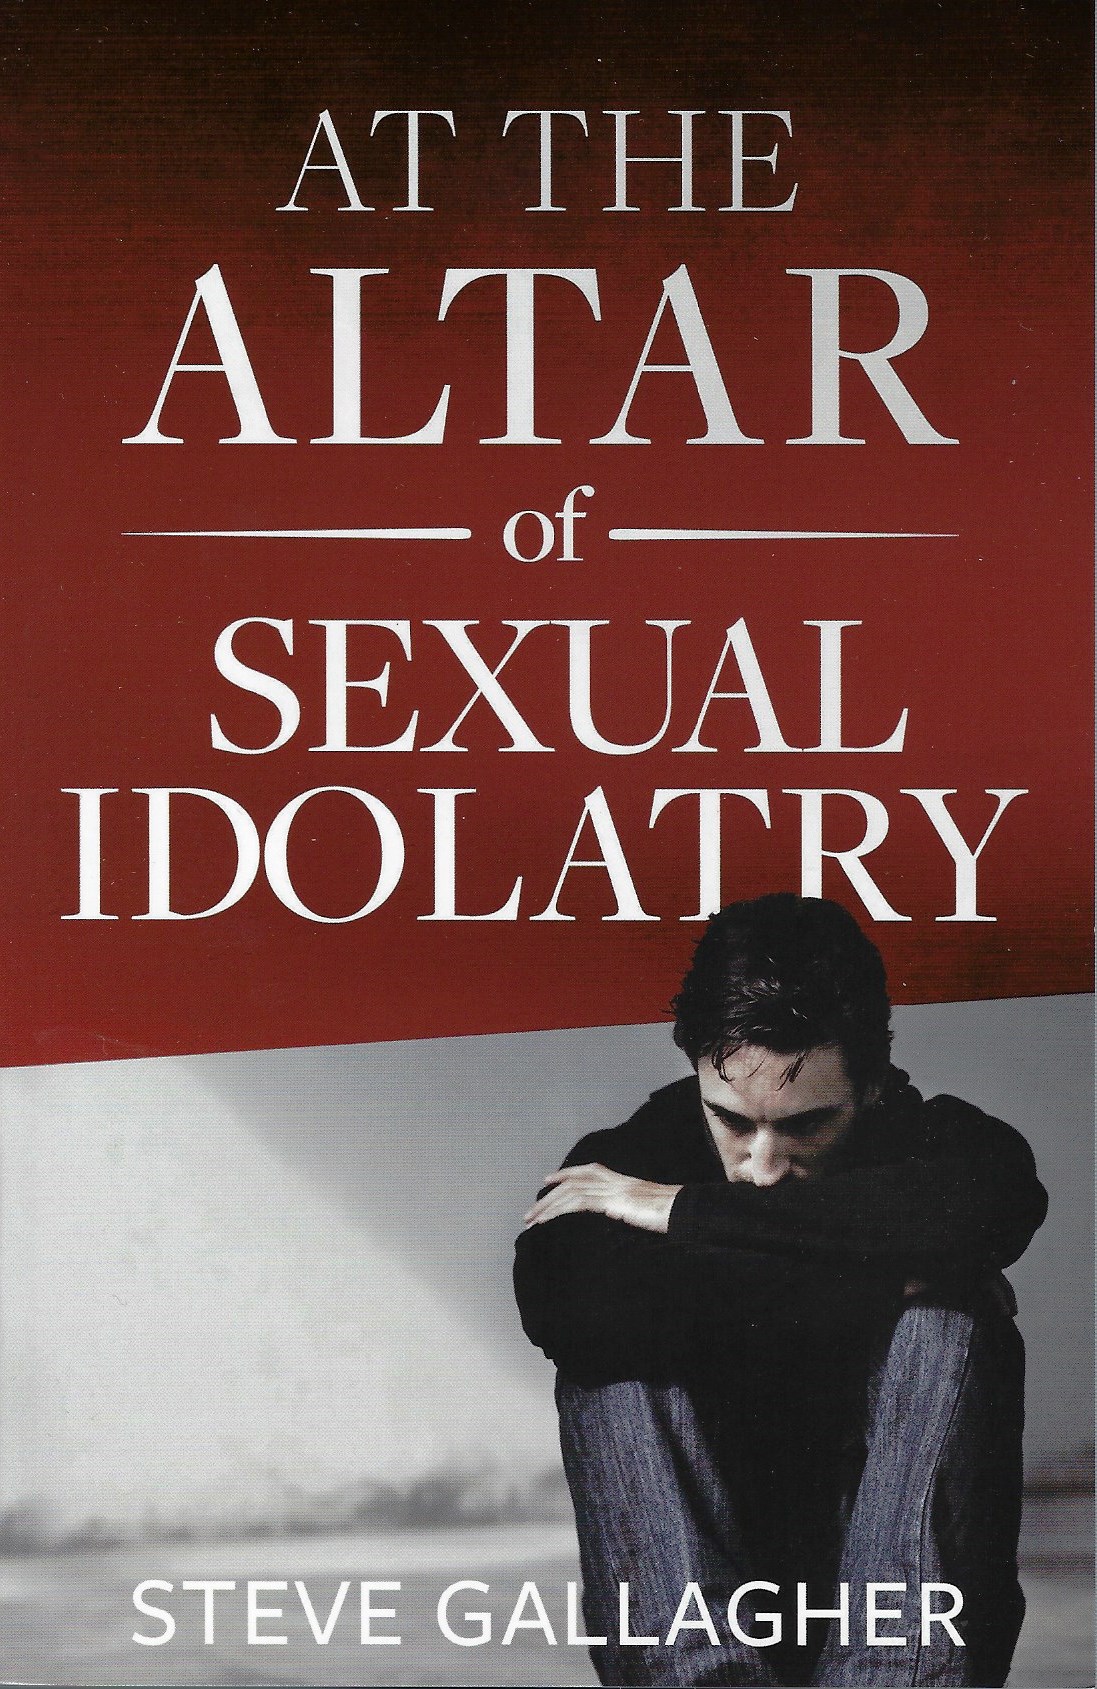 AT THE ALTAR OF SEXUAL IDOLATRY by Steve Gallagher